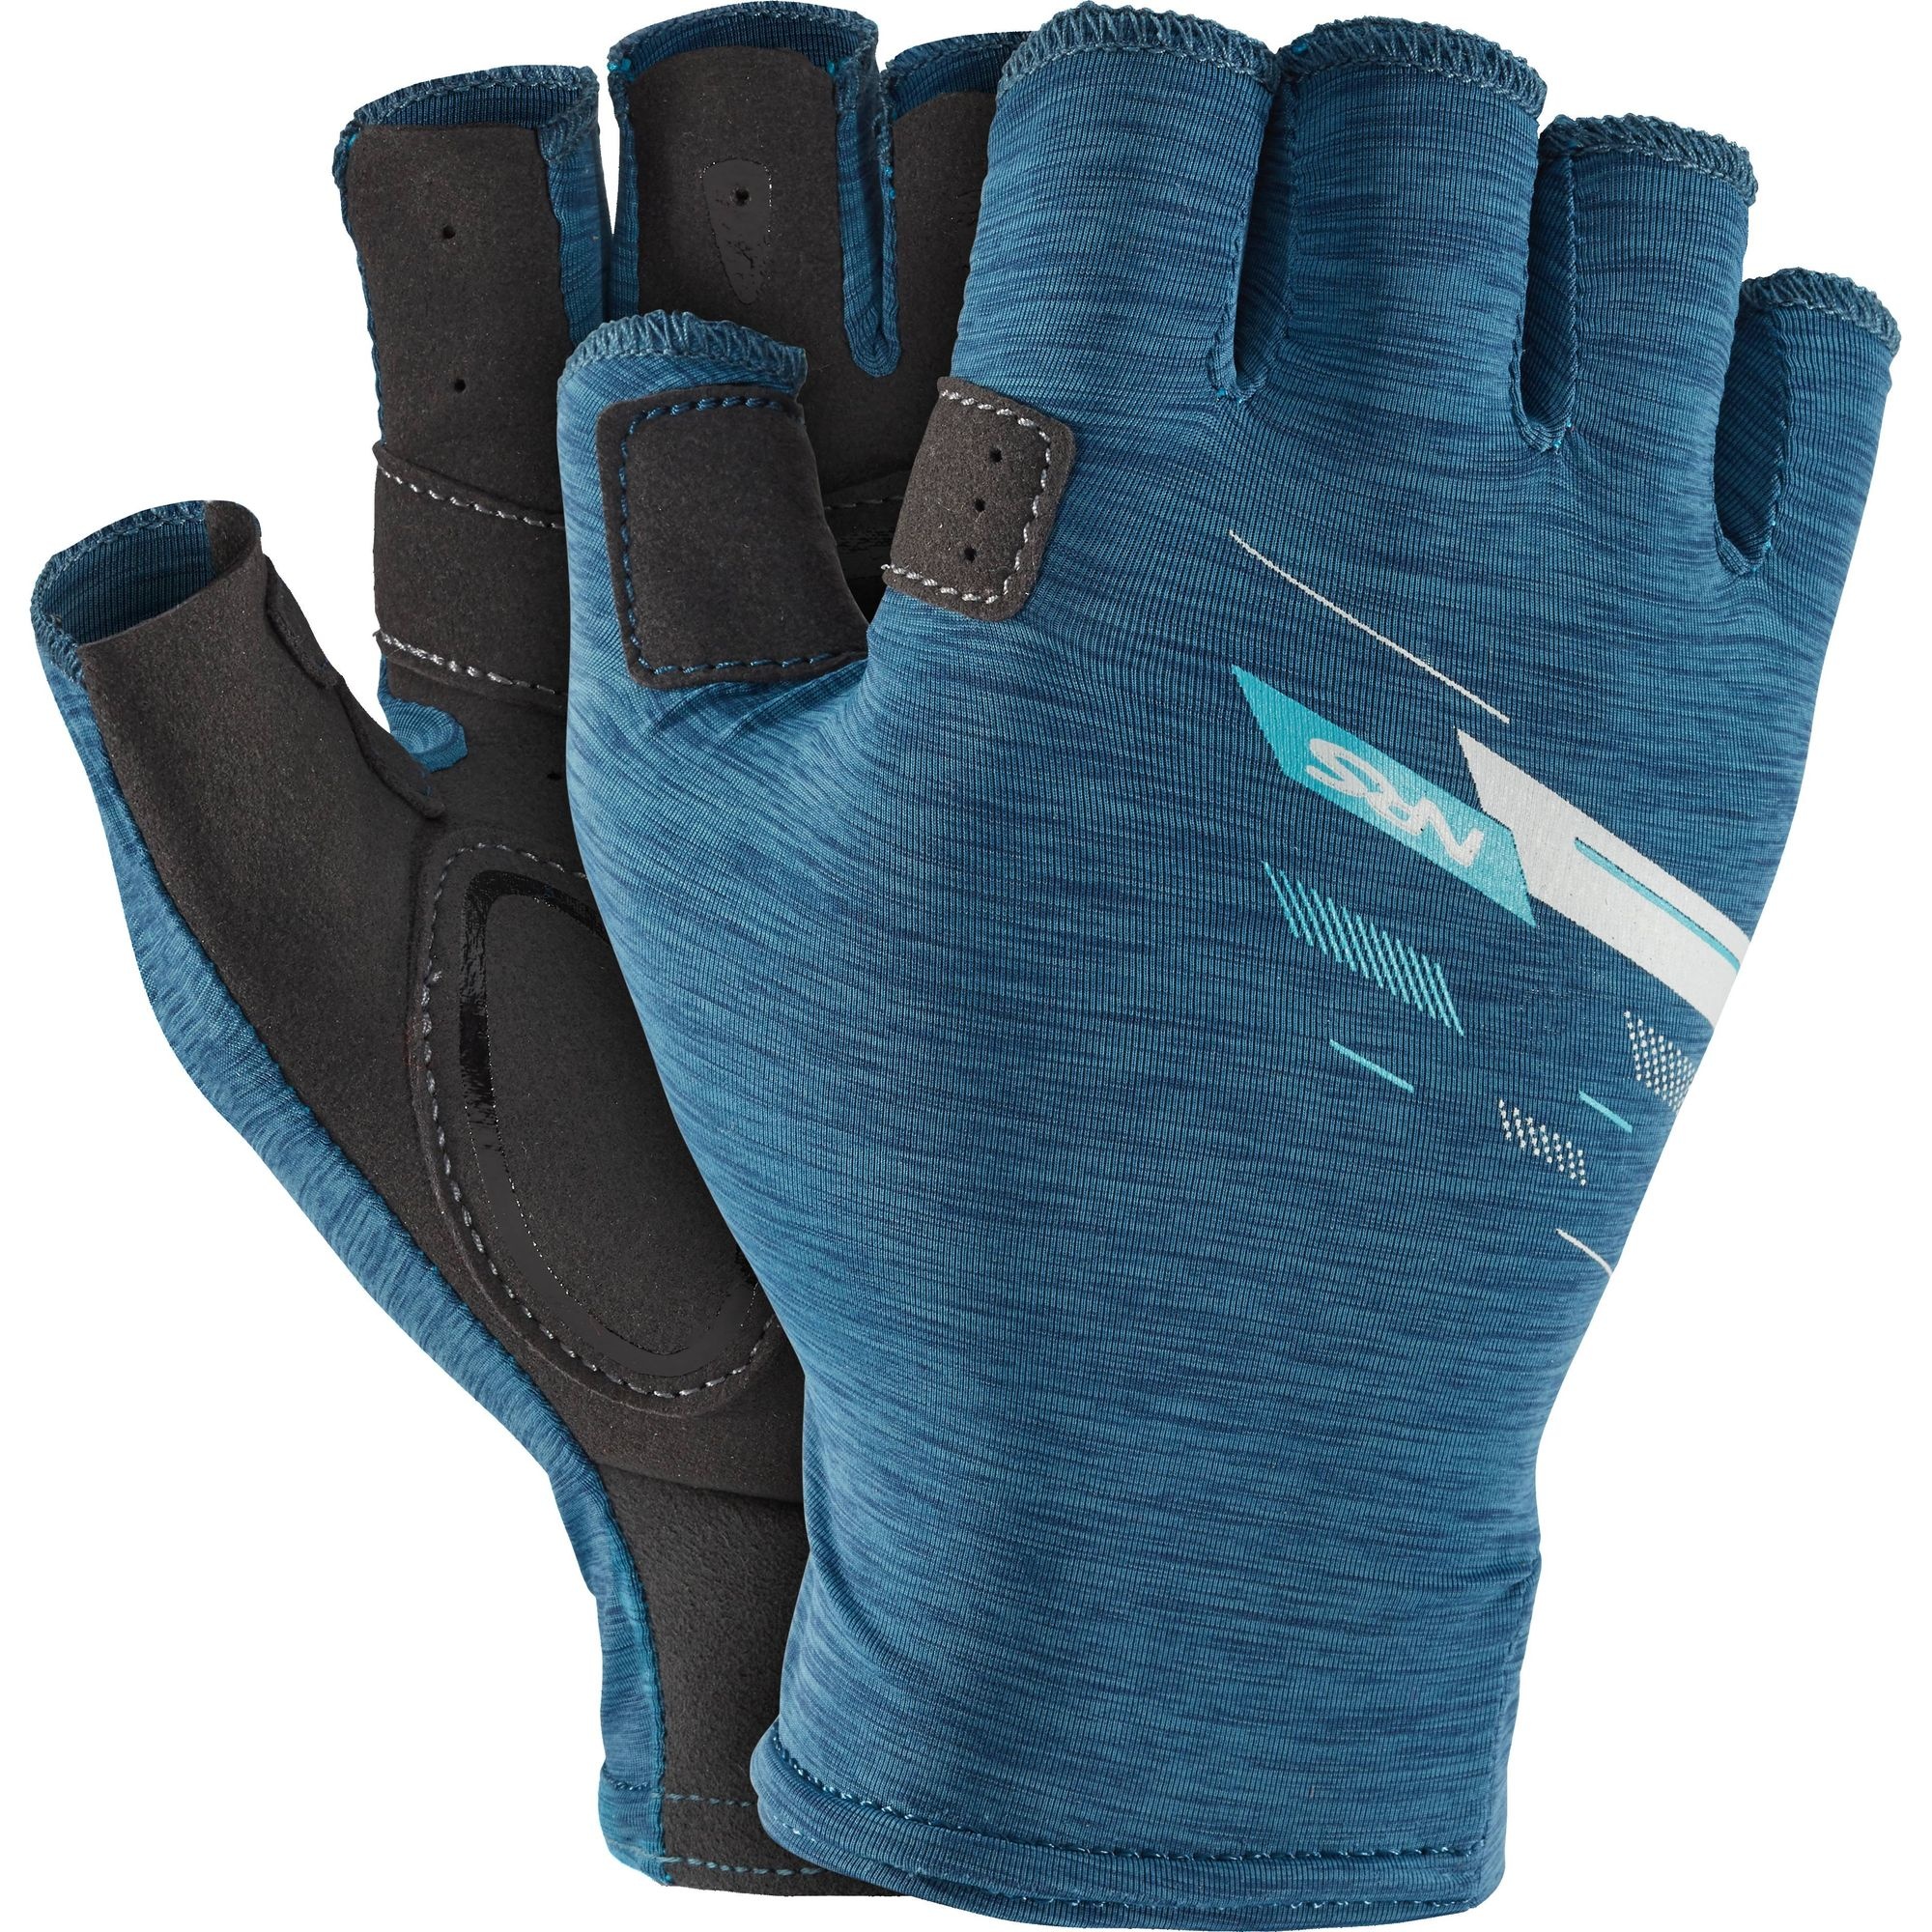 NRS Boaters Glove Mns - 2023 Closeout